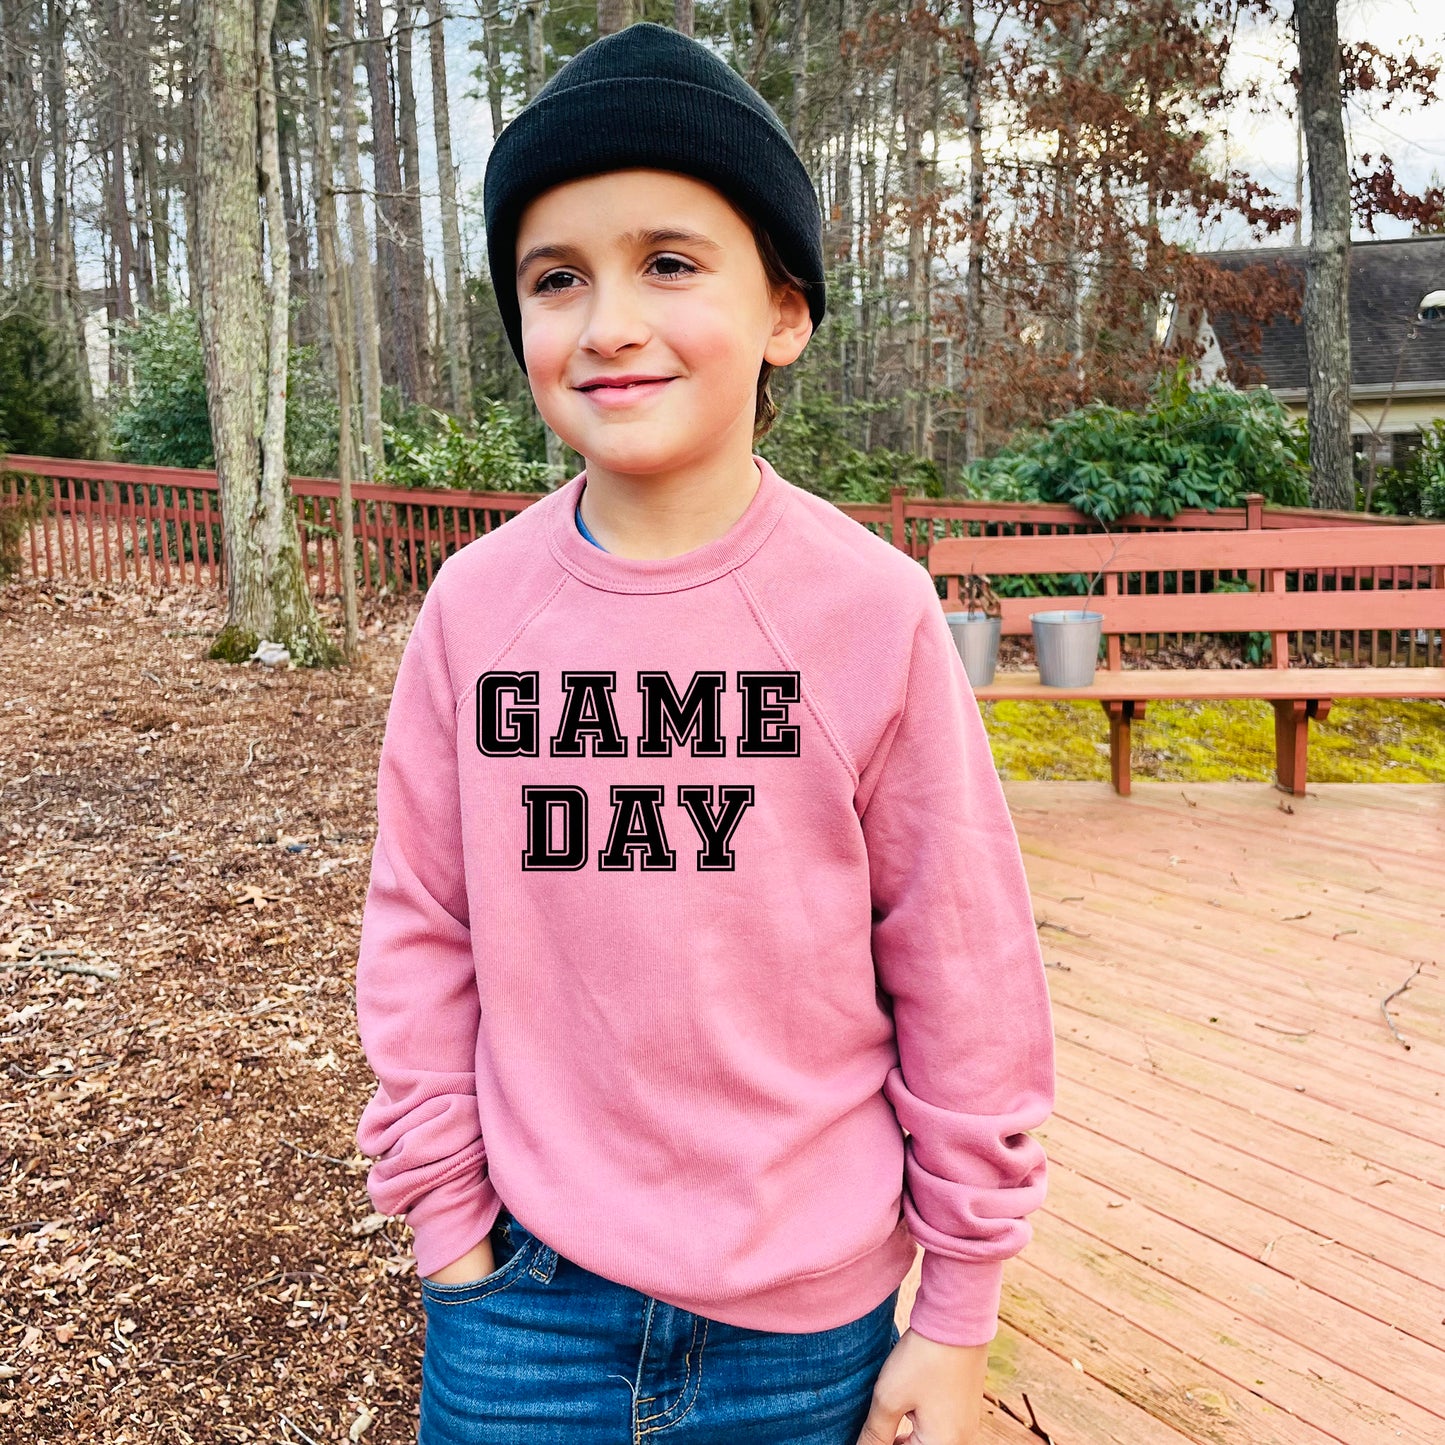 a young boy wearing a pink game day sweatshirt